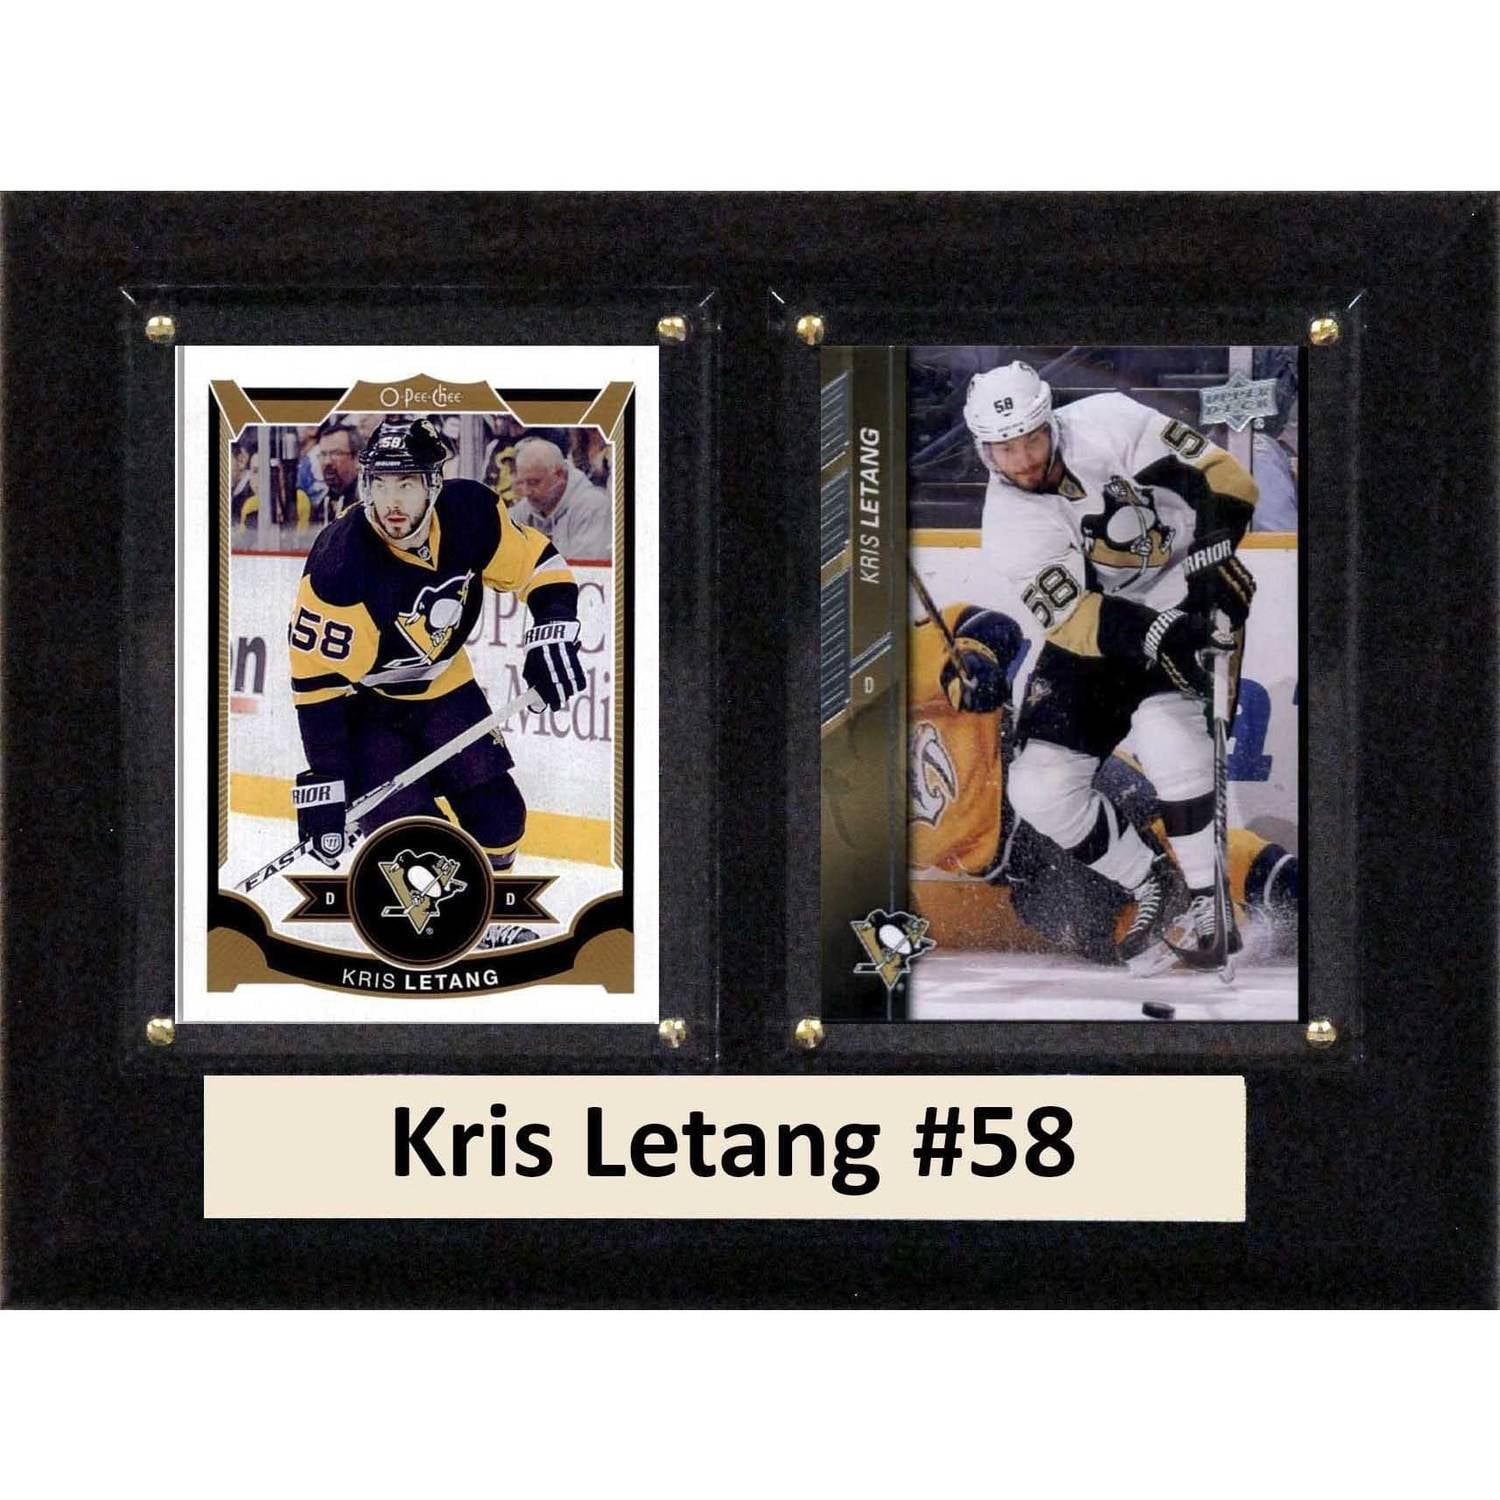 pittsburgh penguins collectables